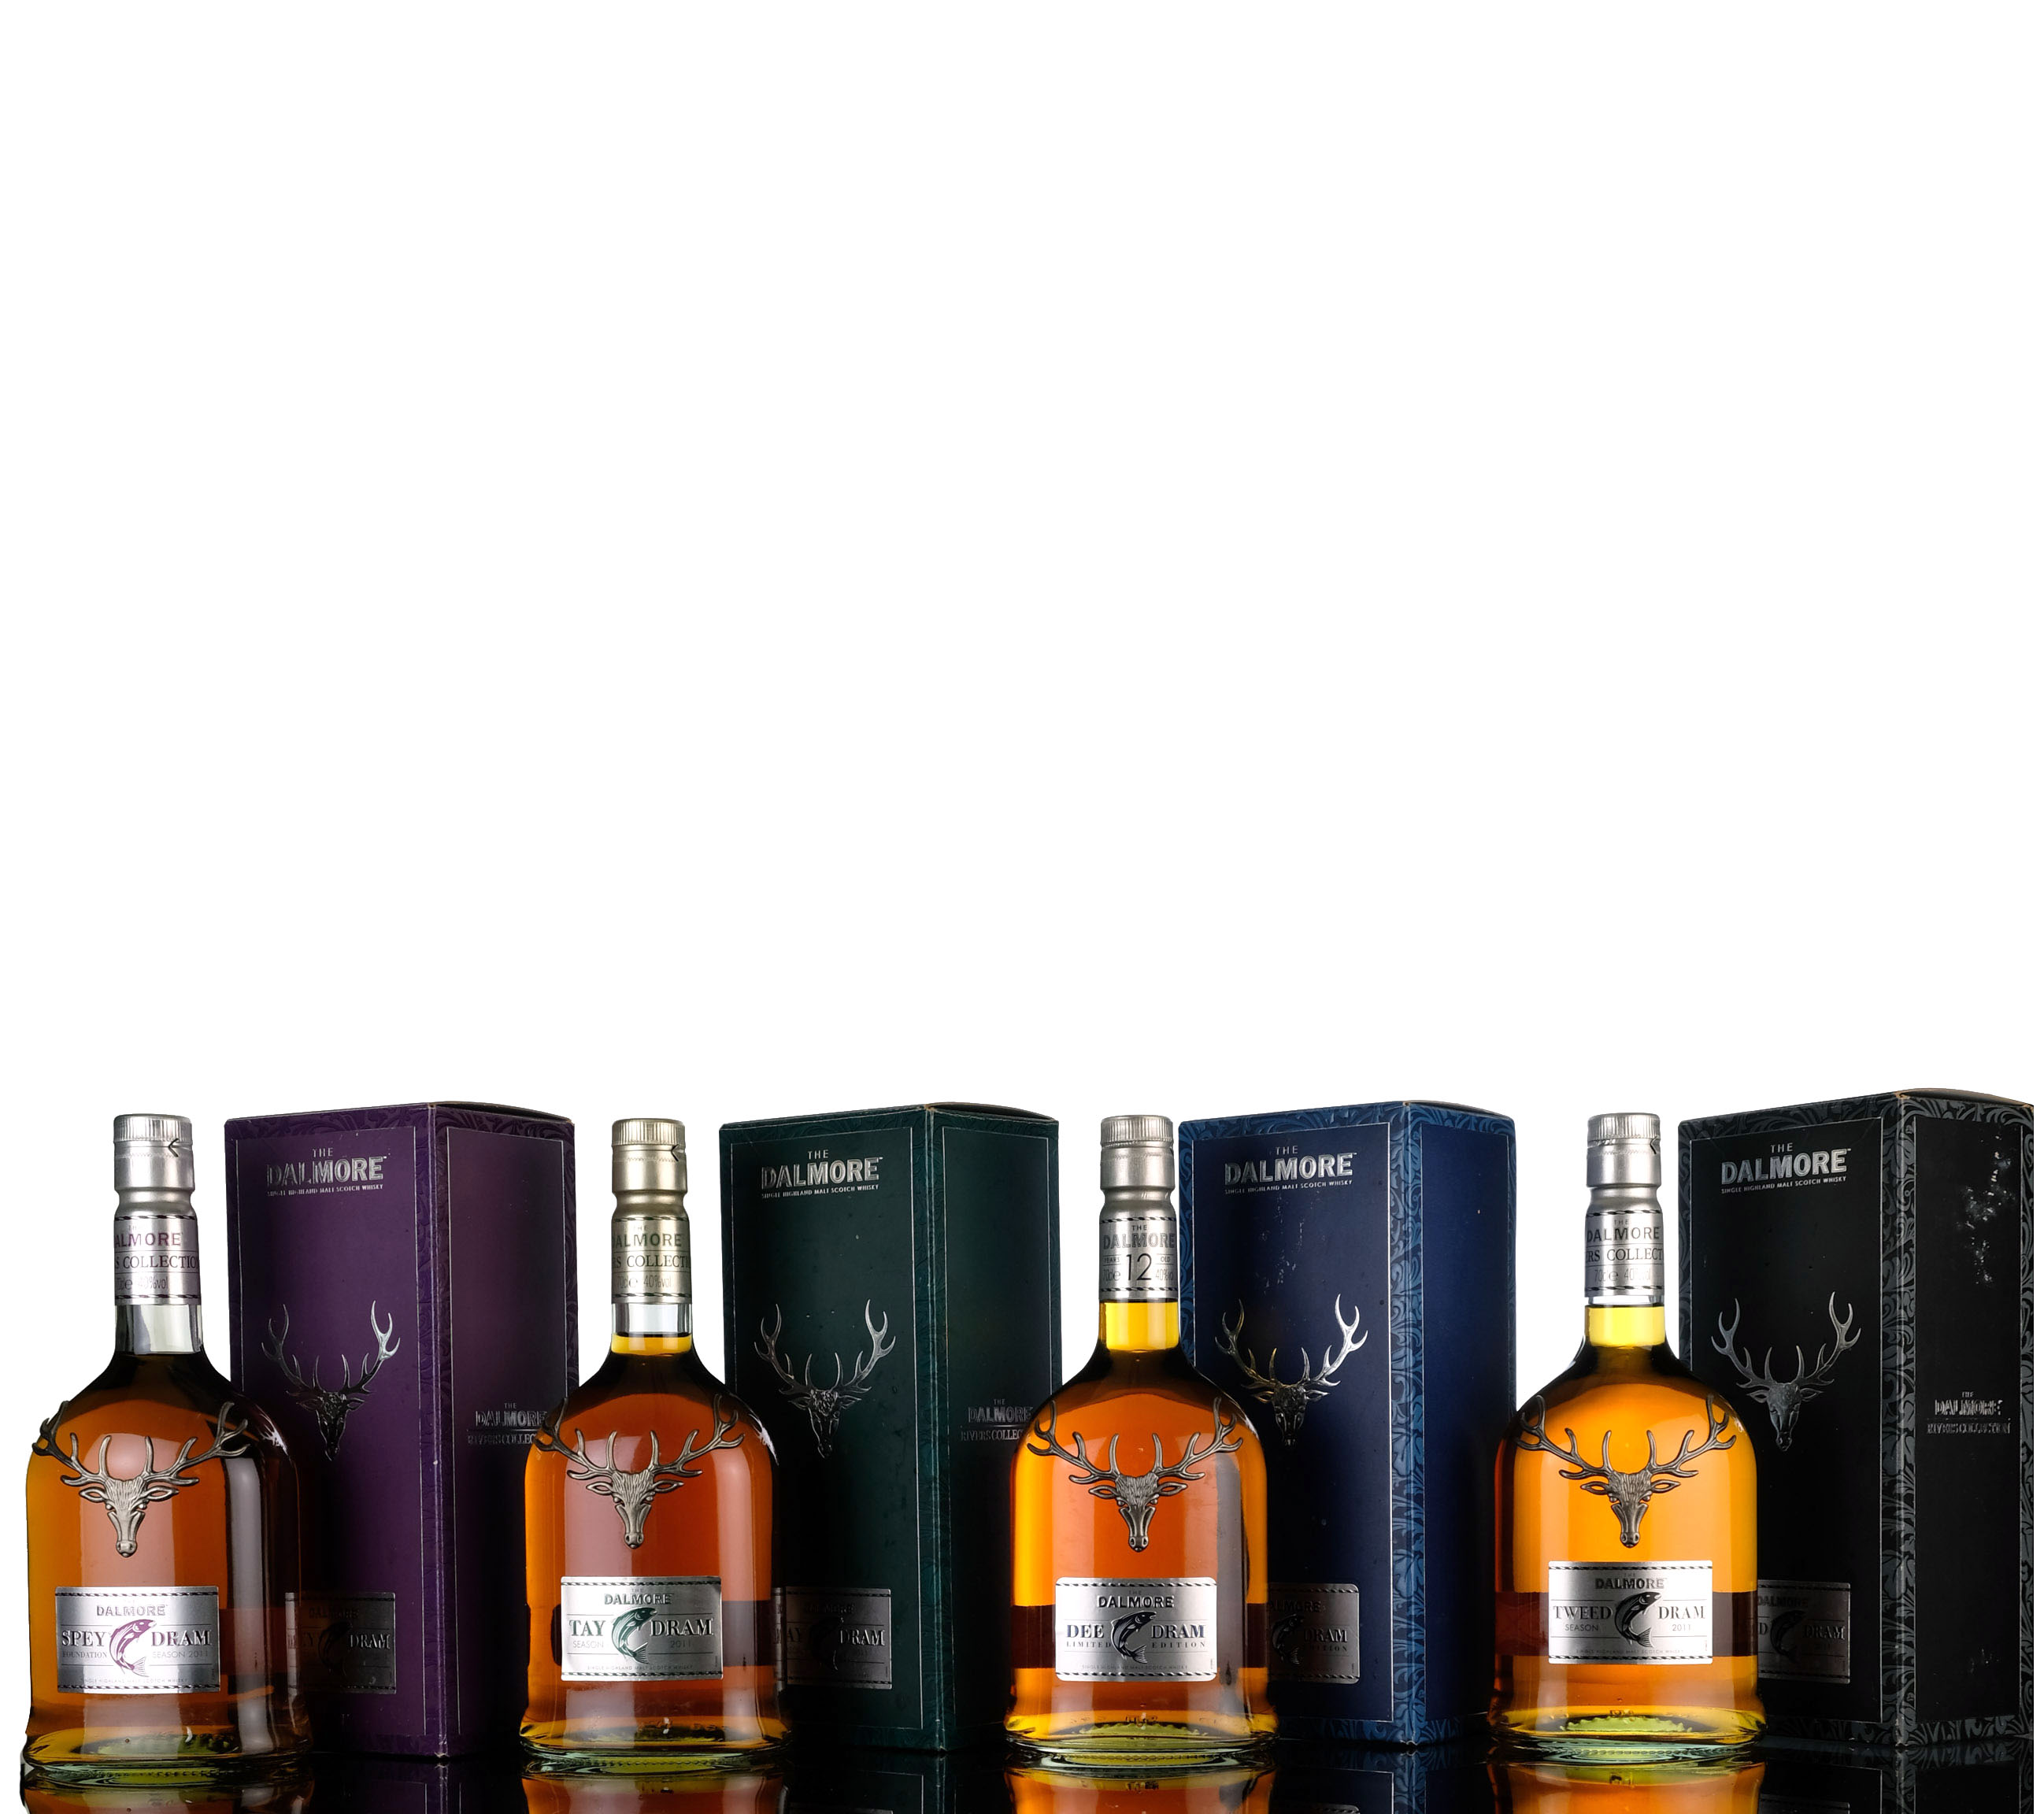 Dalmore River Series - Dee, Spey, Tay and Tweed Drams